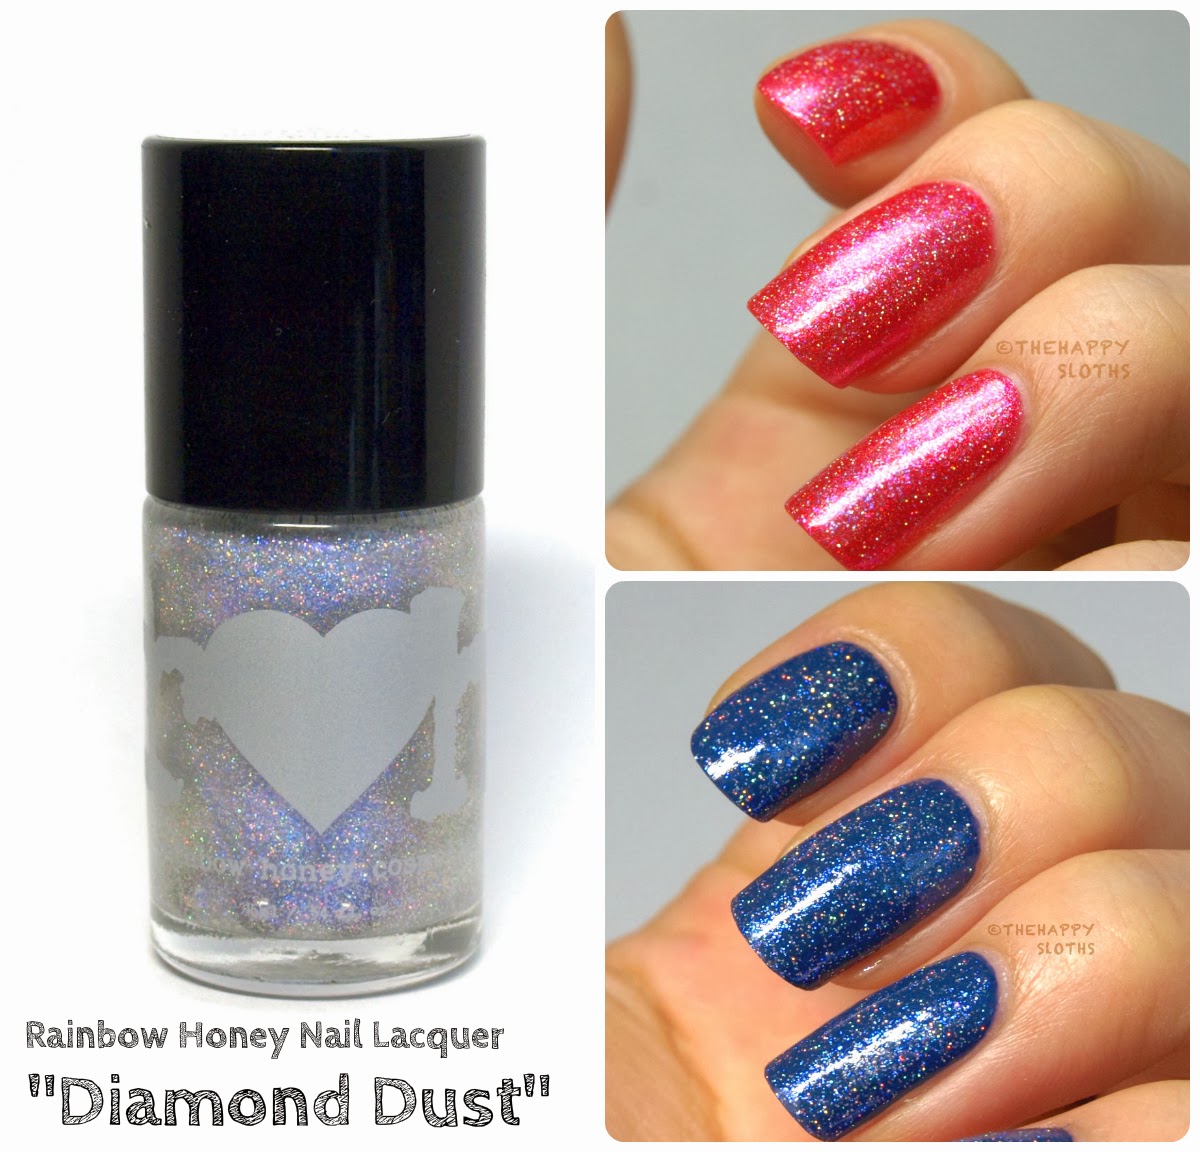 Rainbow Honey Nail Lacquer in Diamond Dust: Review and Swatches  The  Happy Sloths: Beauty, Makeup, and Skincare Blog with Reviews and Swatches